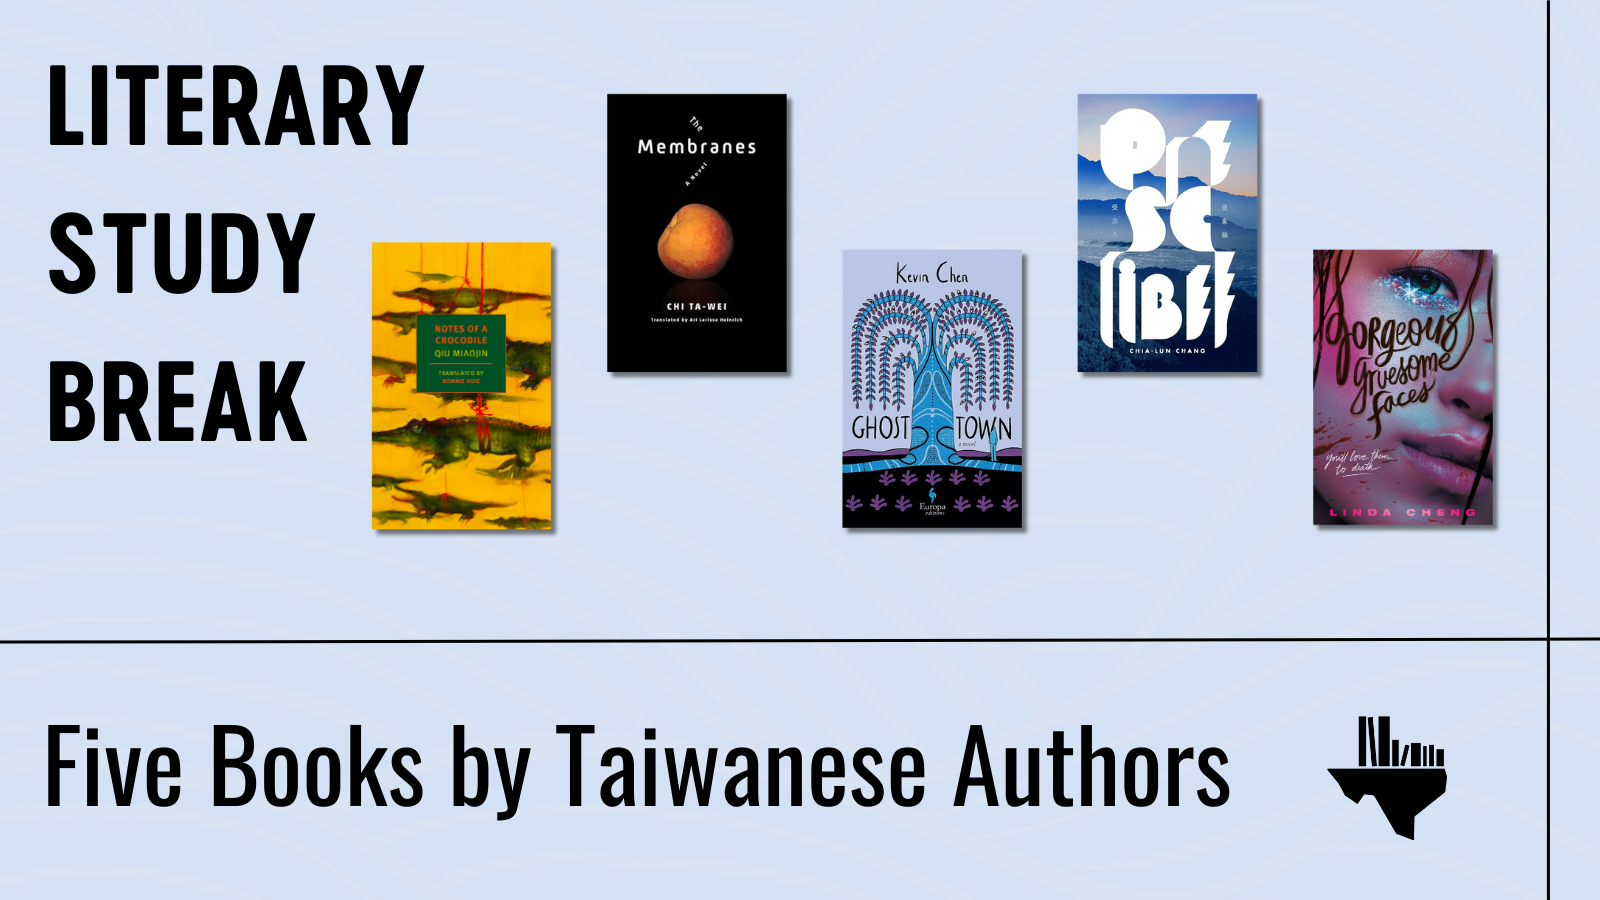 Literary Study Break: Five Books by Taiwanese Authors book covers of five books